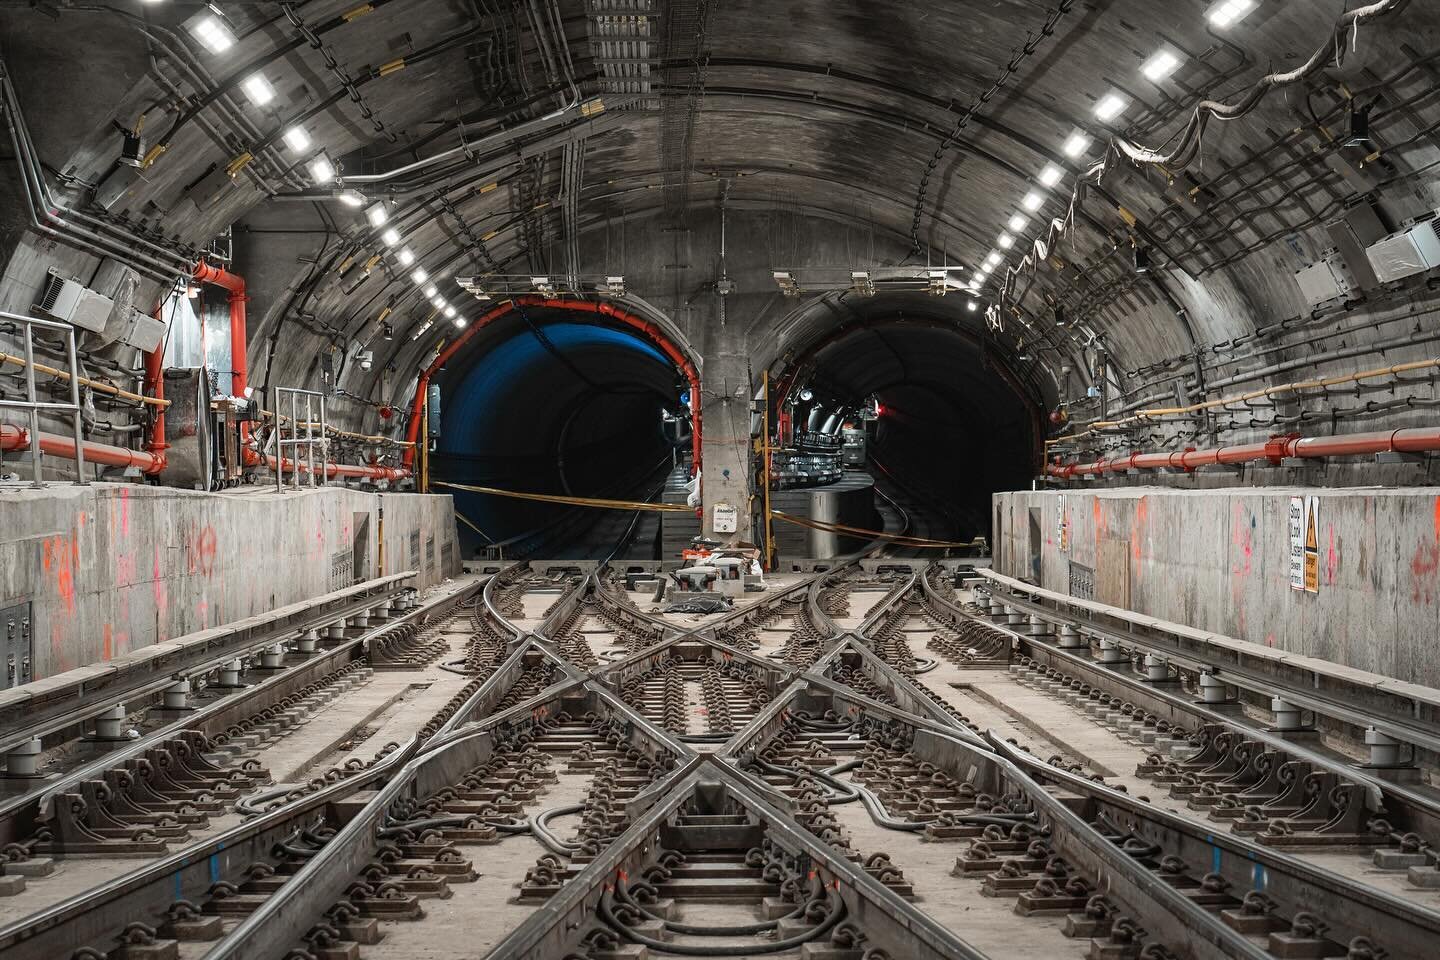 Welcome to 2024: an introduction and conclusion, featuring some after/before construction progress photos from the East Side Access project, which finally opened in 2023. (We may be going deeper today, though.)
.
I decided to post this today, because